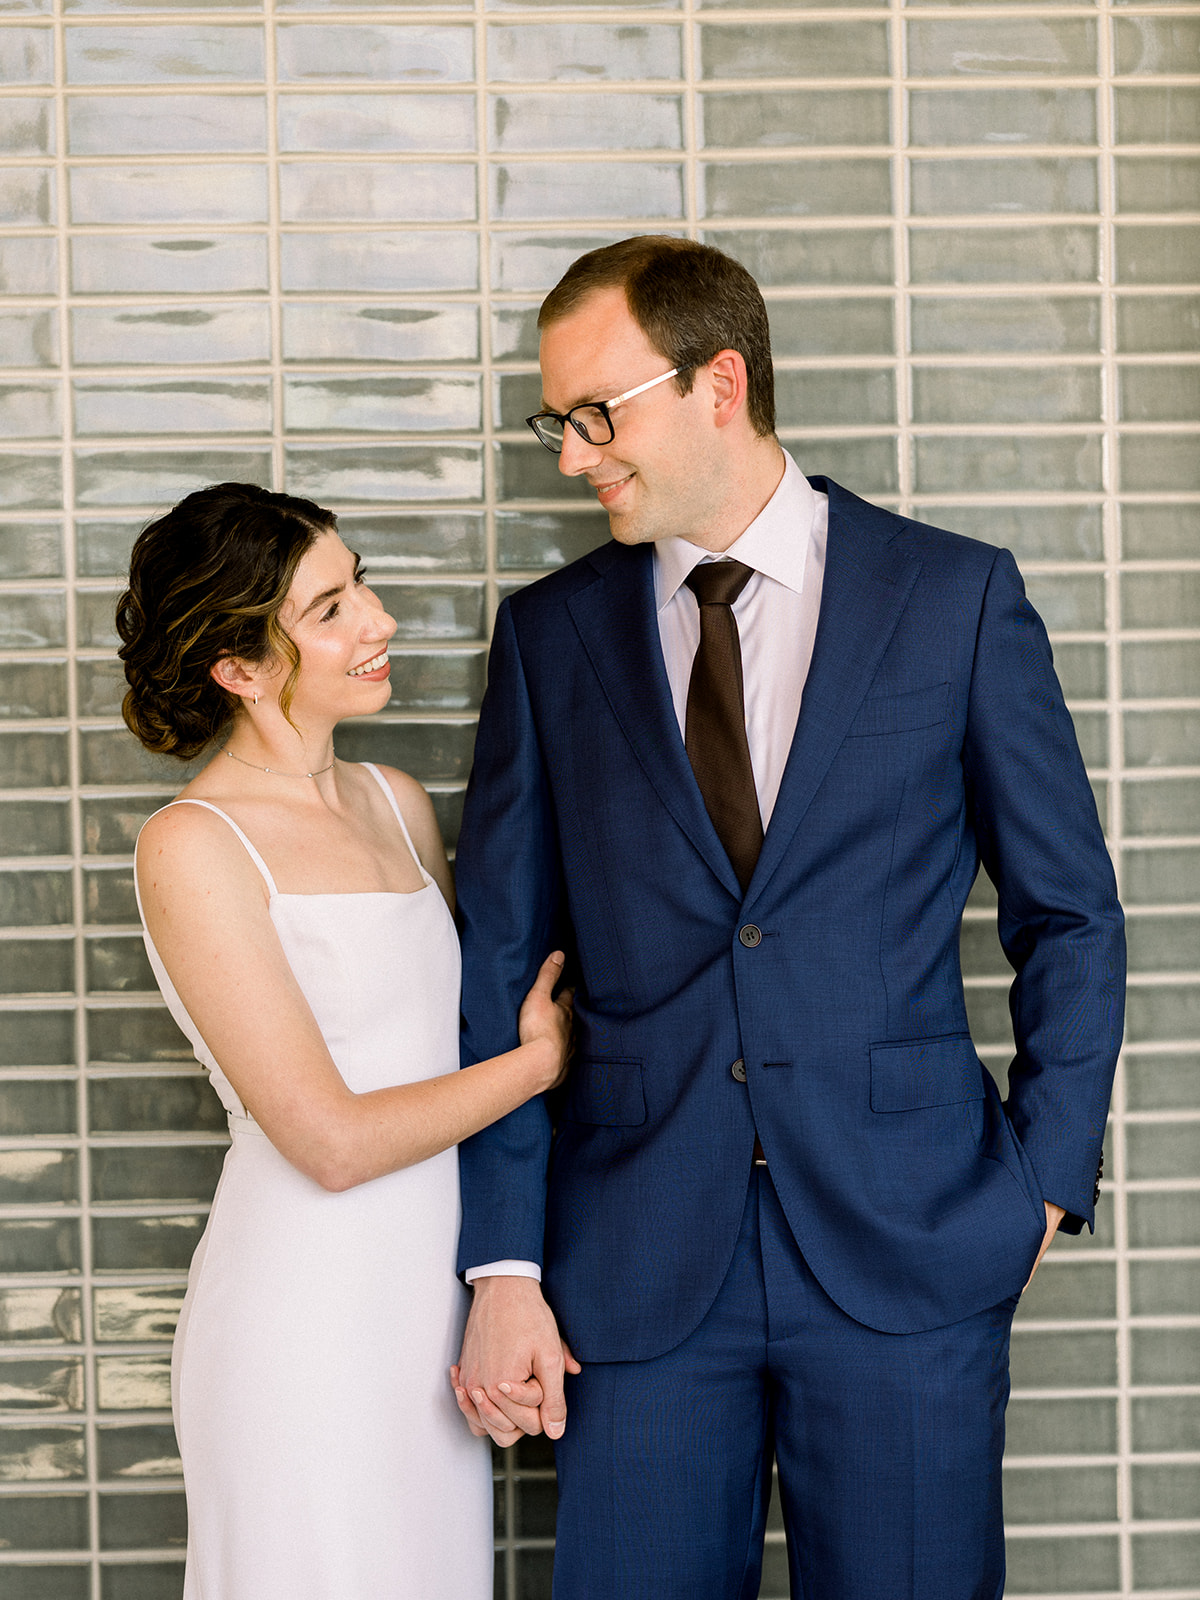 bride in contemporary spaghetti strap dress and low chignon bun poses with groom wearing glasses and navy suit